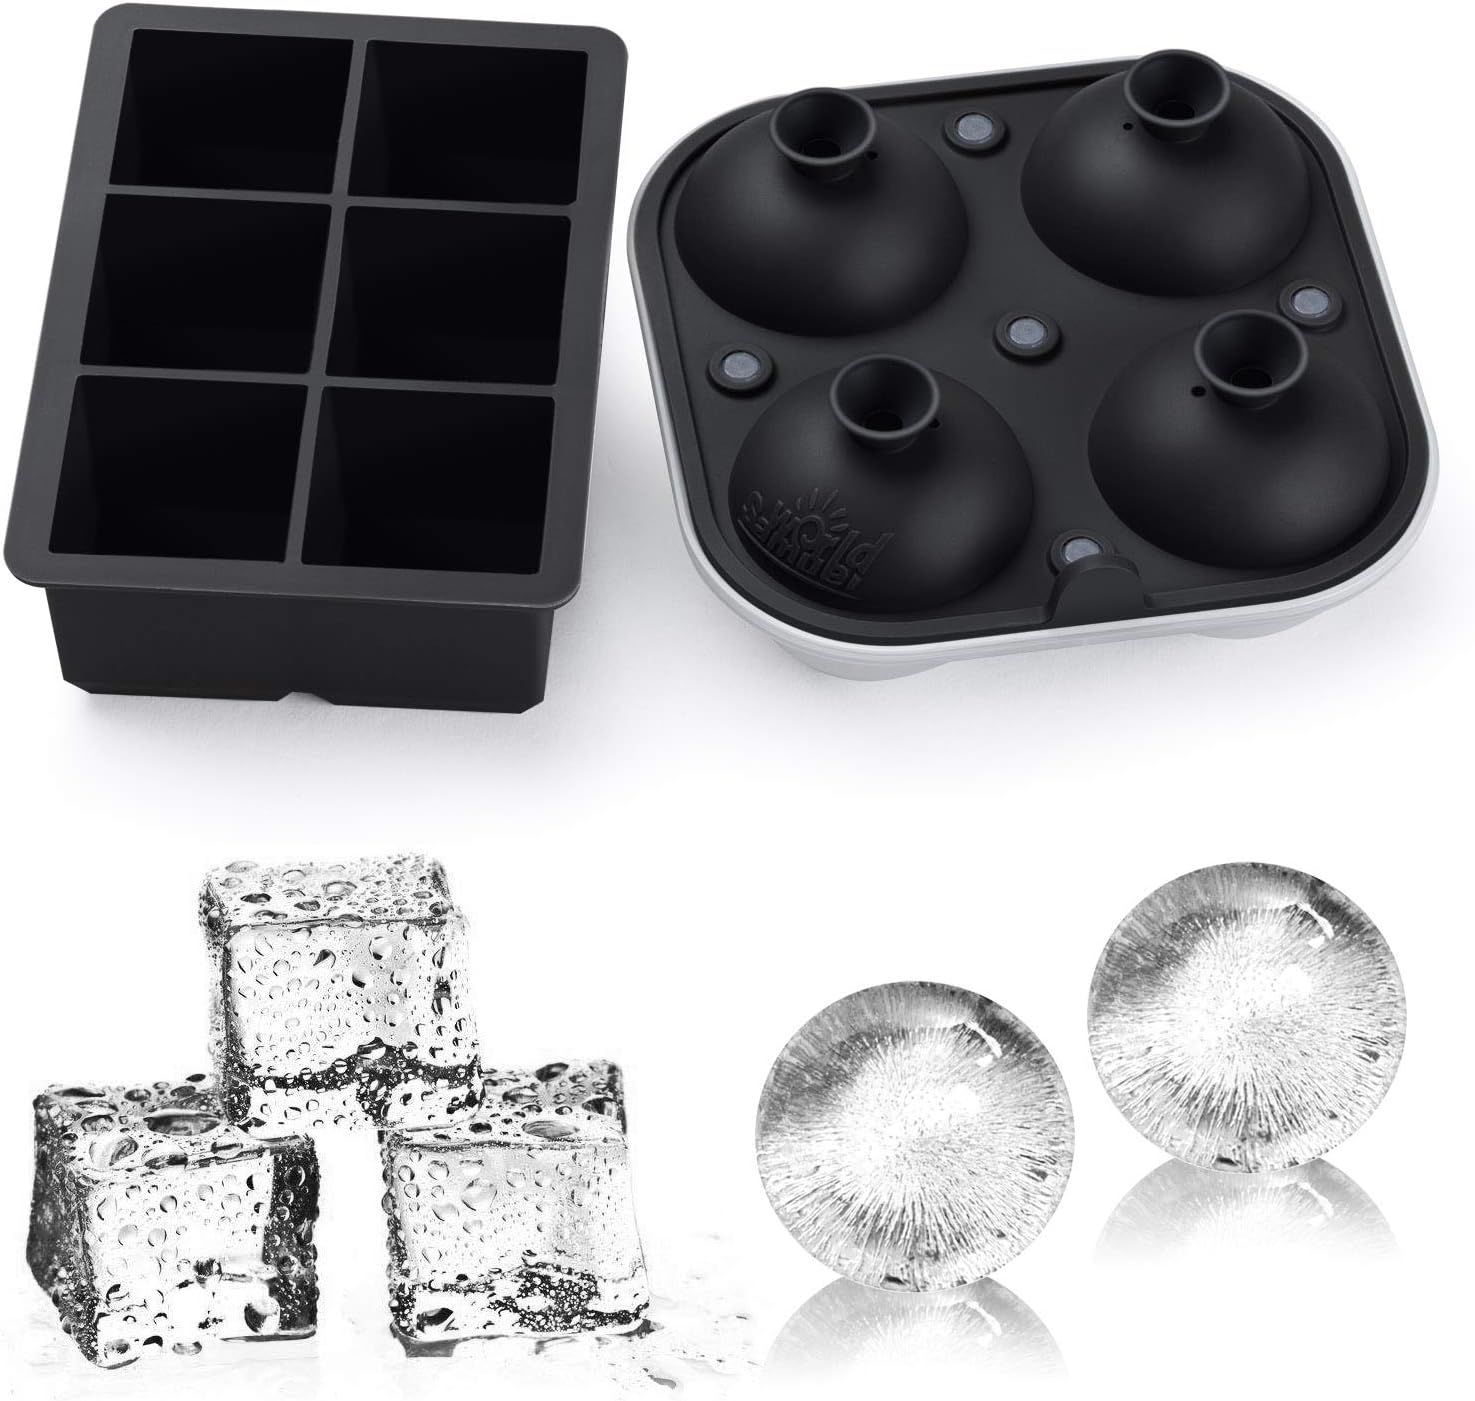 Samuelworld Ice Cube Trays - Jumble Big Cubes & 2.5 inches Large Sphere Ice Mold Combo for Whiskey a | Amazon (US)